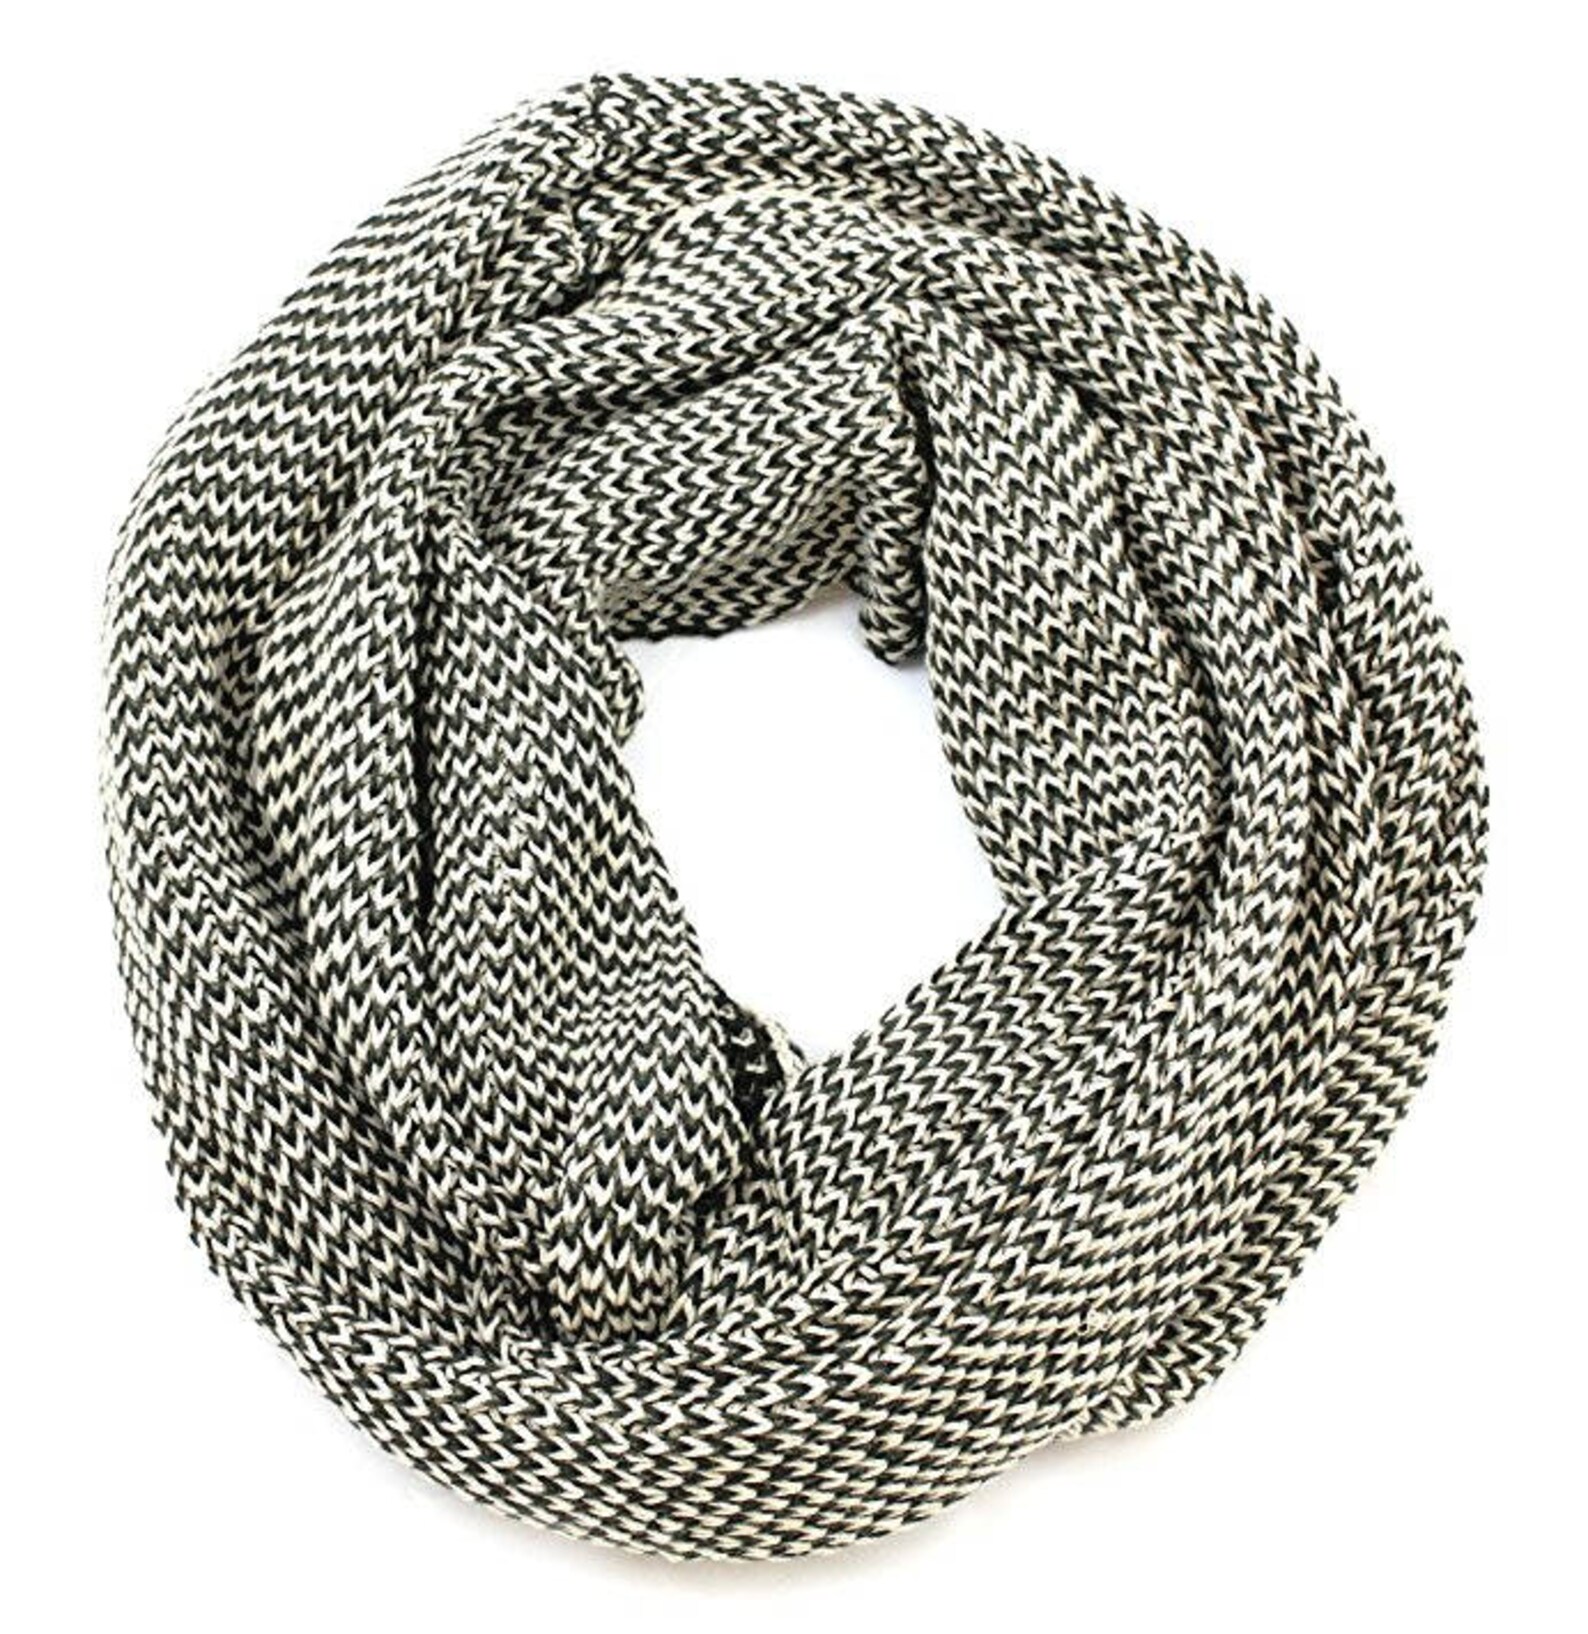 Men's Knit Infinity Scarf 8 Colors 100% Organic Cotton - Etsy